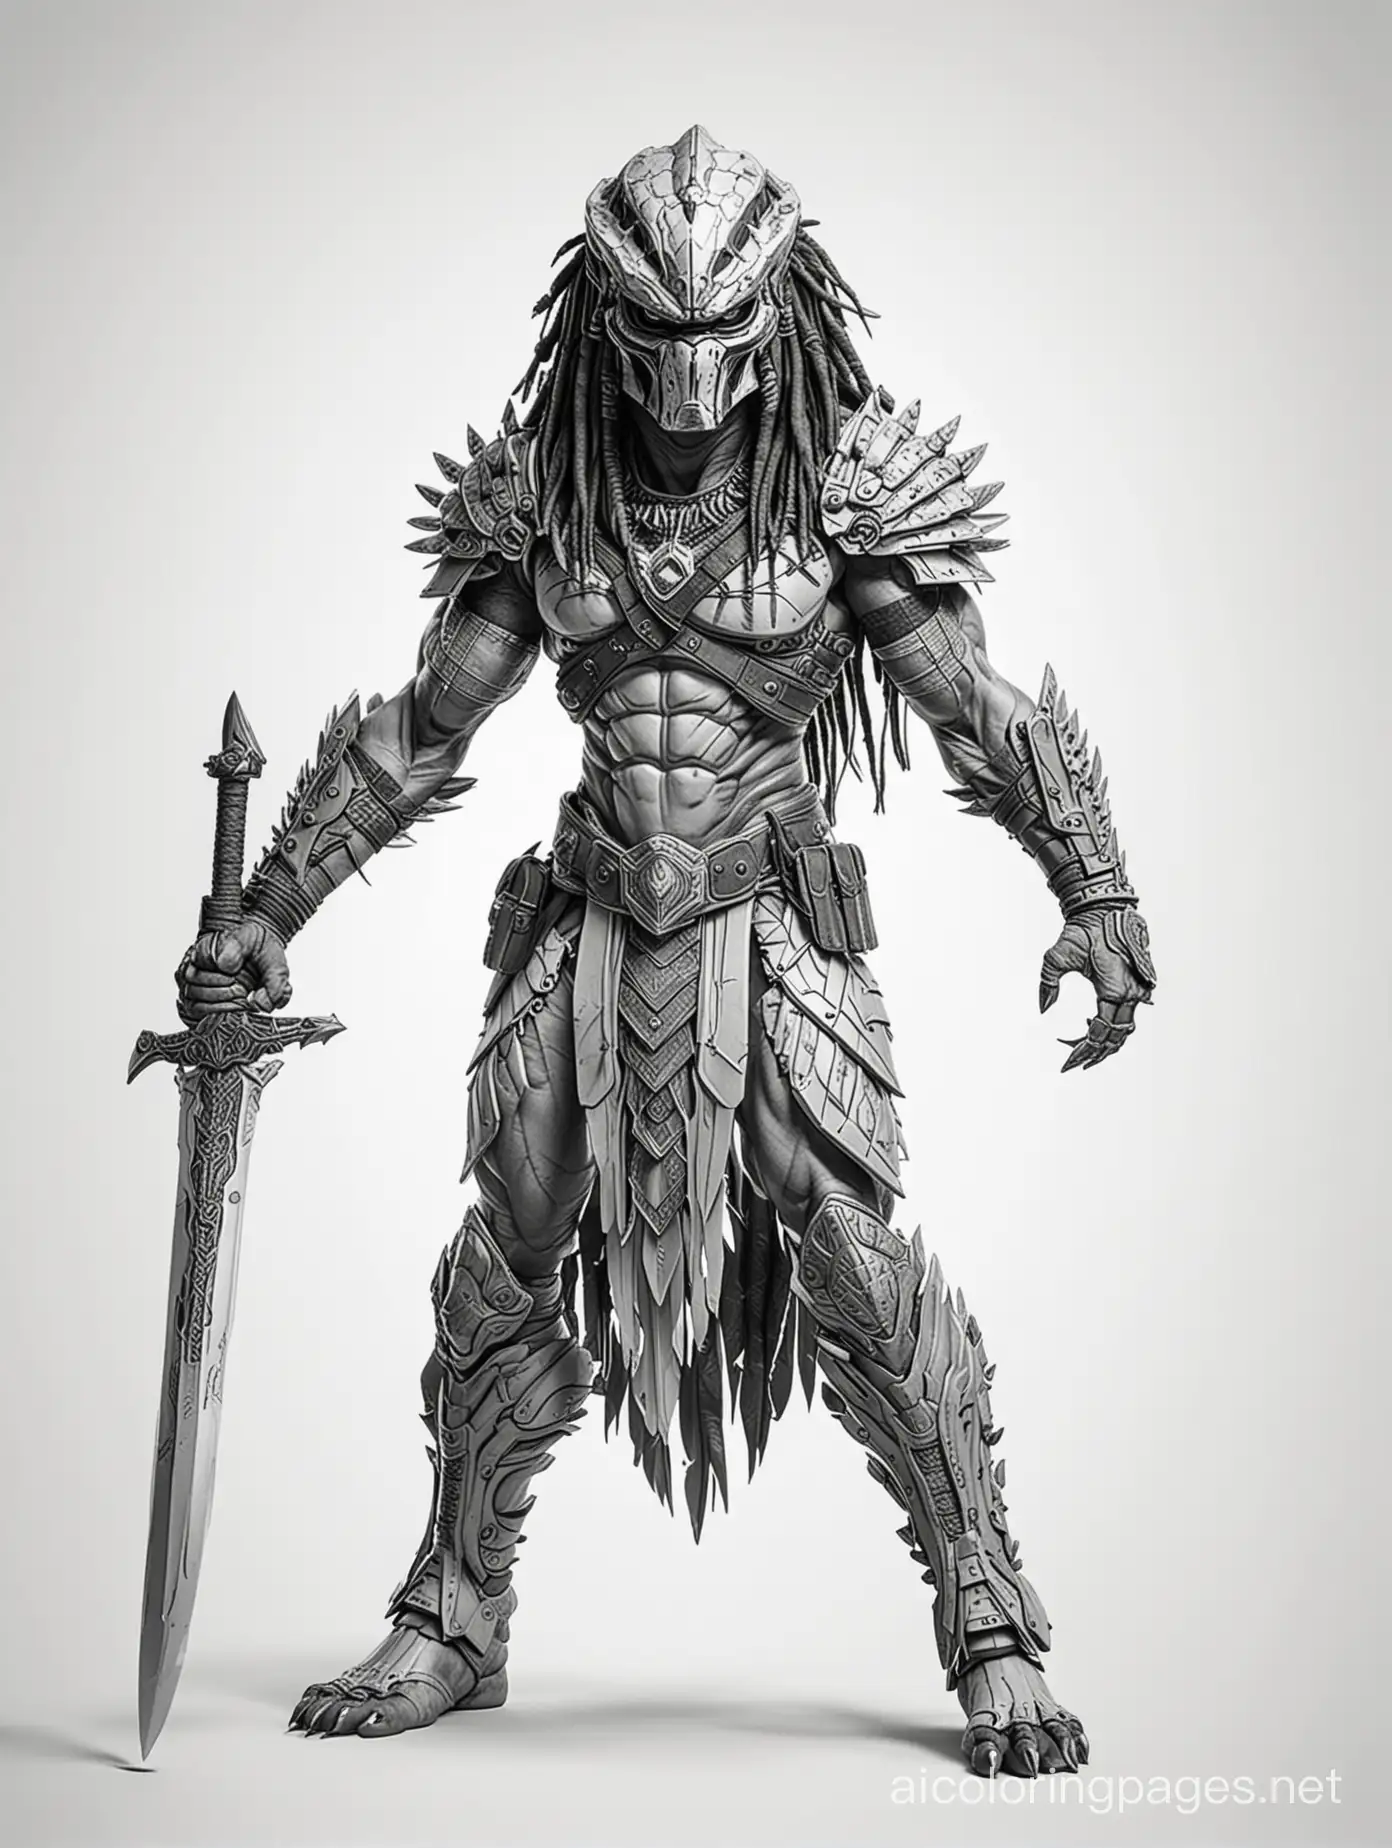 Yautja predator with sword., Coloring Page, black and white, line art, white background, Simplicity, Ample White Space. The background of the coloring page is plain white to make it easy for young children to color within the lines. The outlines of all the subjects are easy to distinguish, making it simple for kids to color without too much difficulty